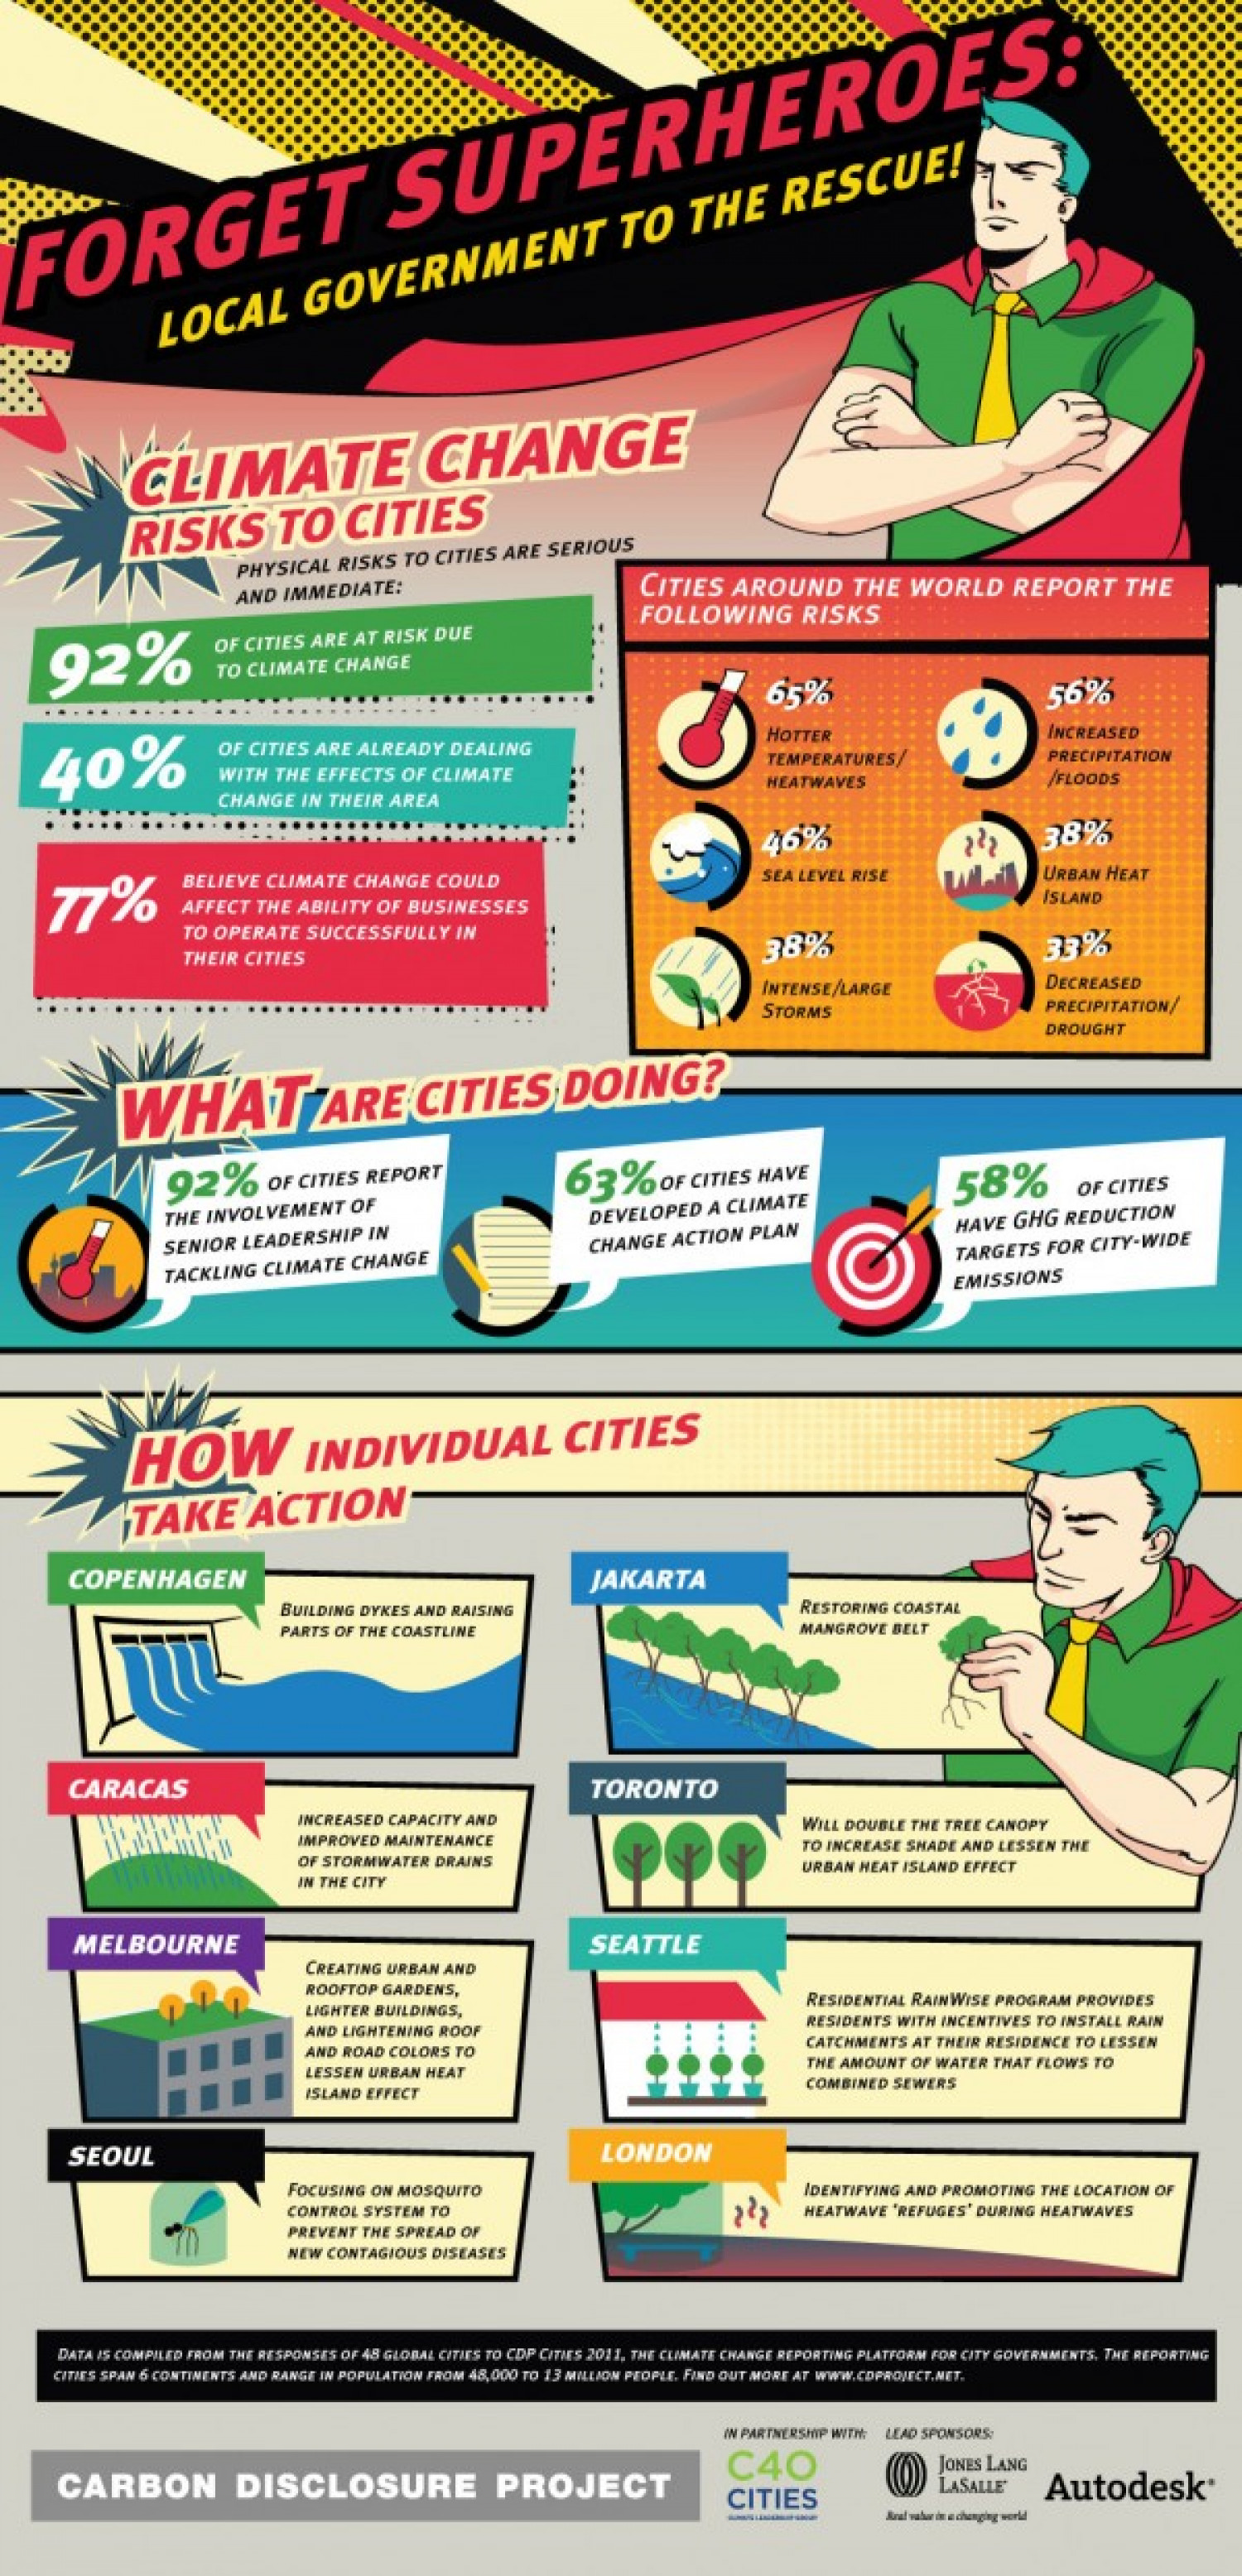 Forget Superheroes: Local Government To The Rescue Infographic